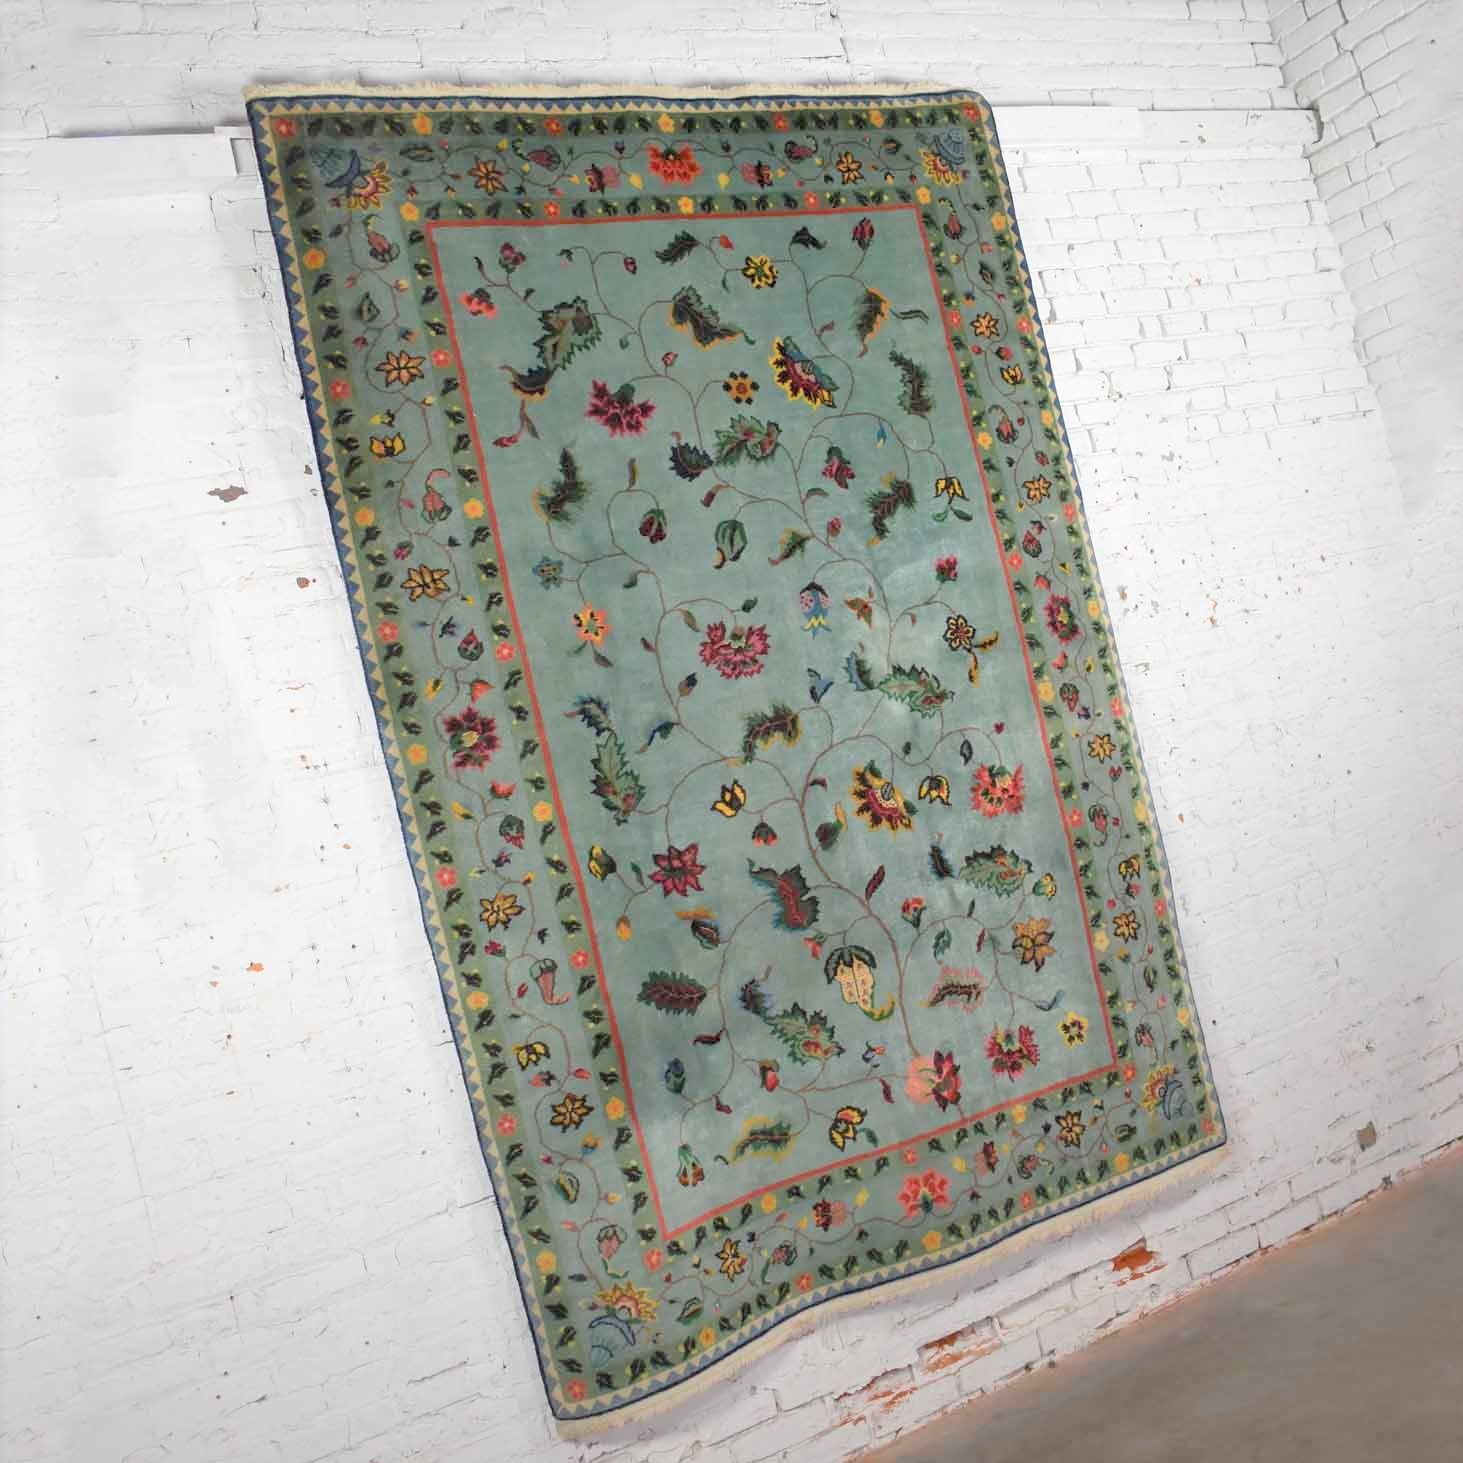 Vintage Chinese Peking Wool Handmade Rug in Teal Green with Overall Pattern 6’x 8.9’